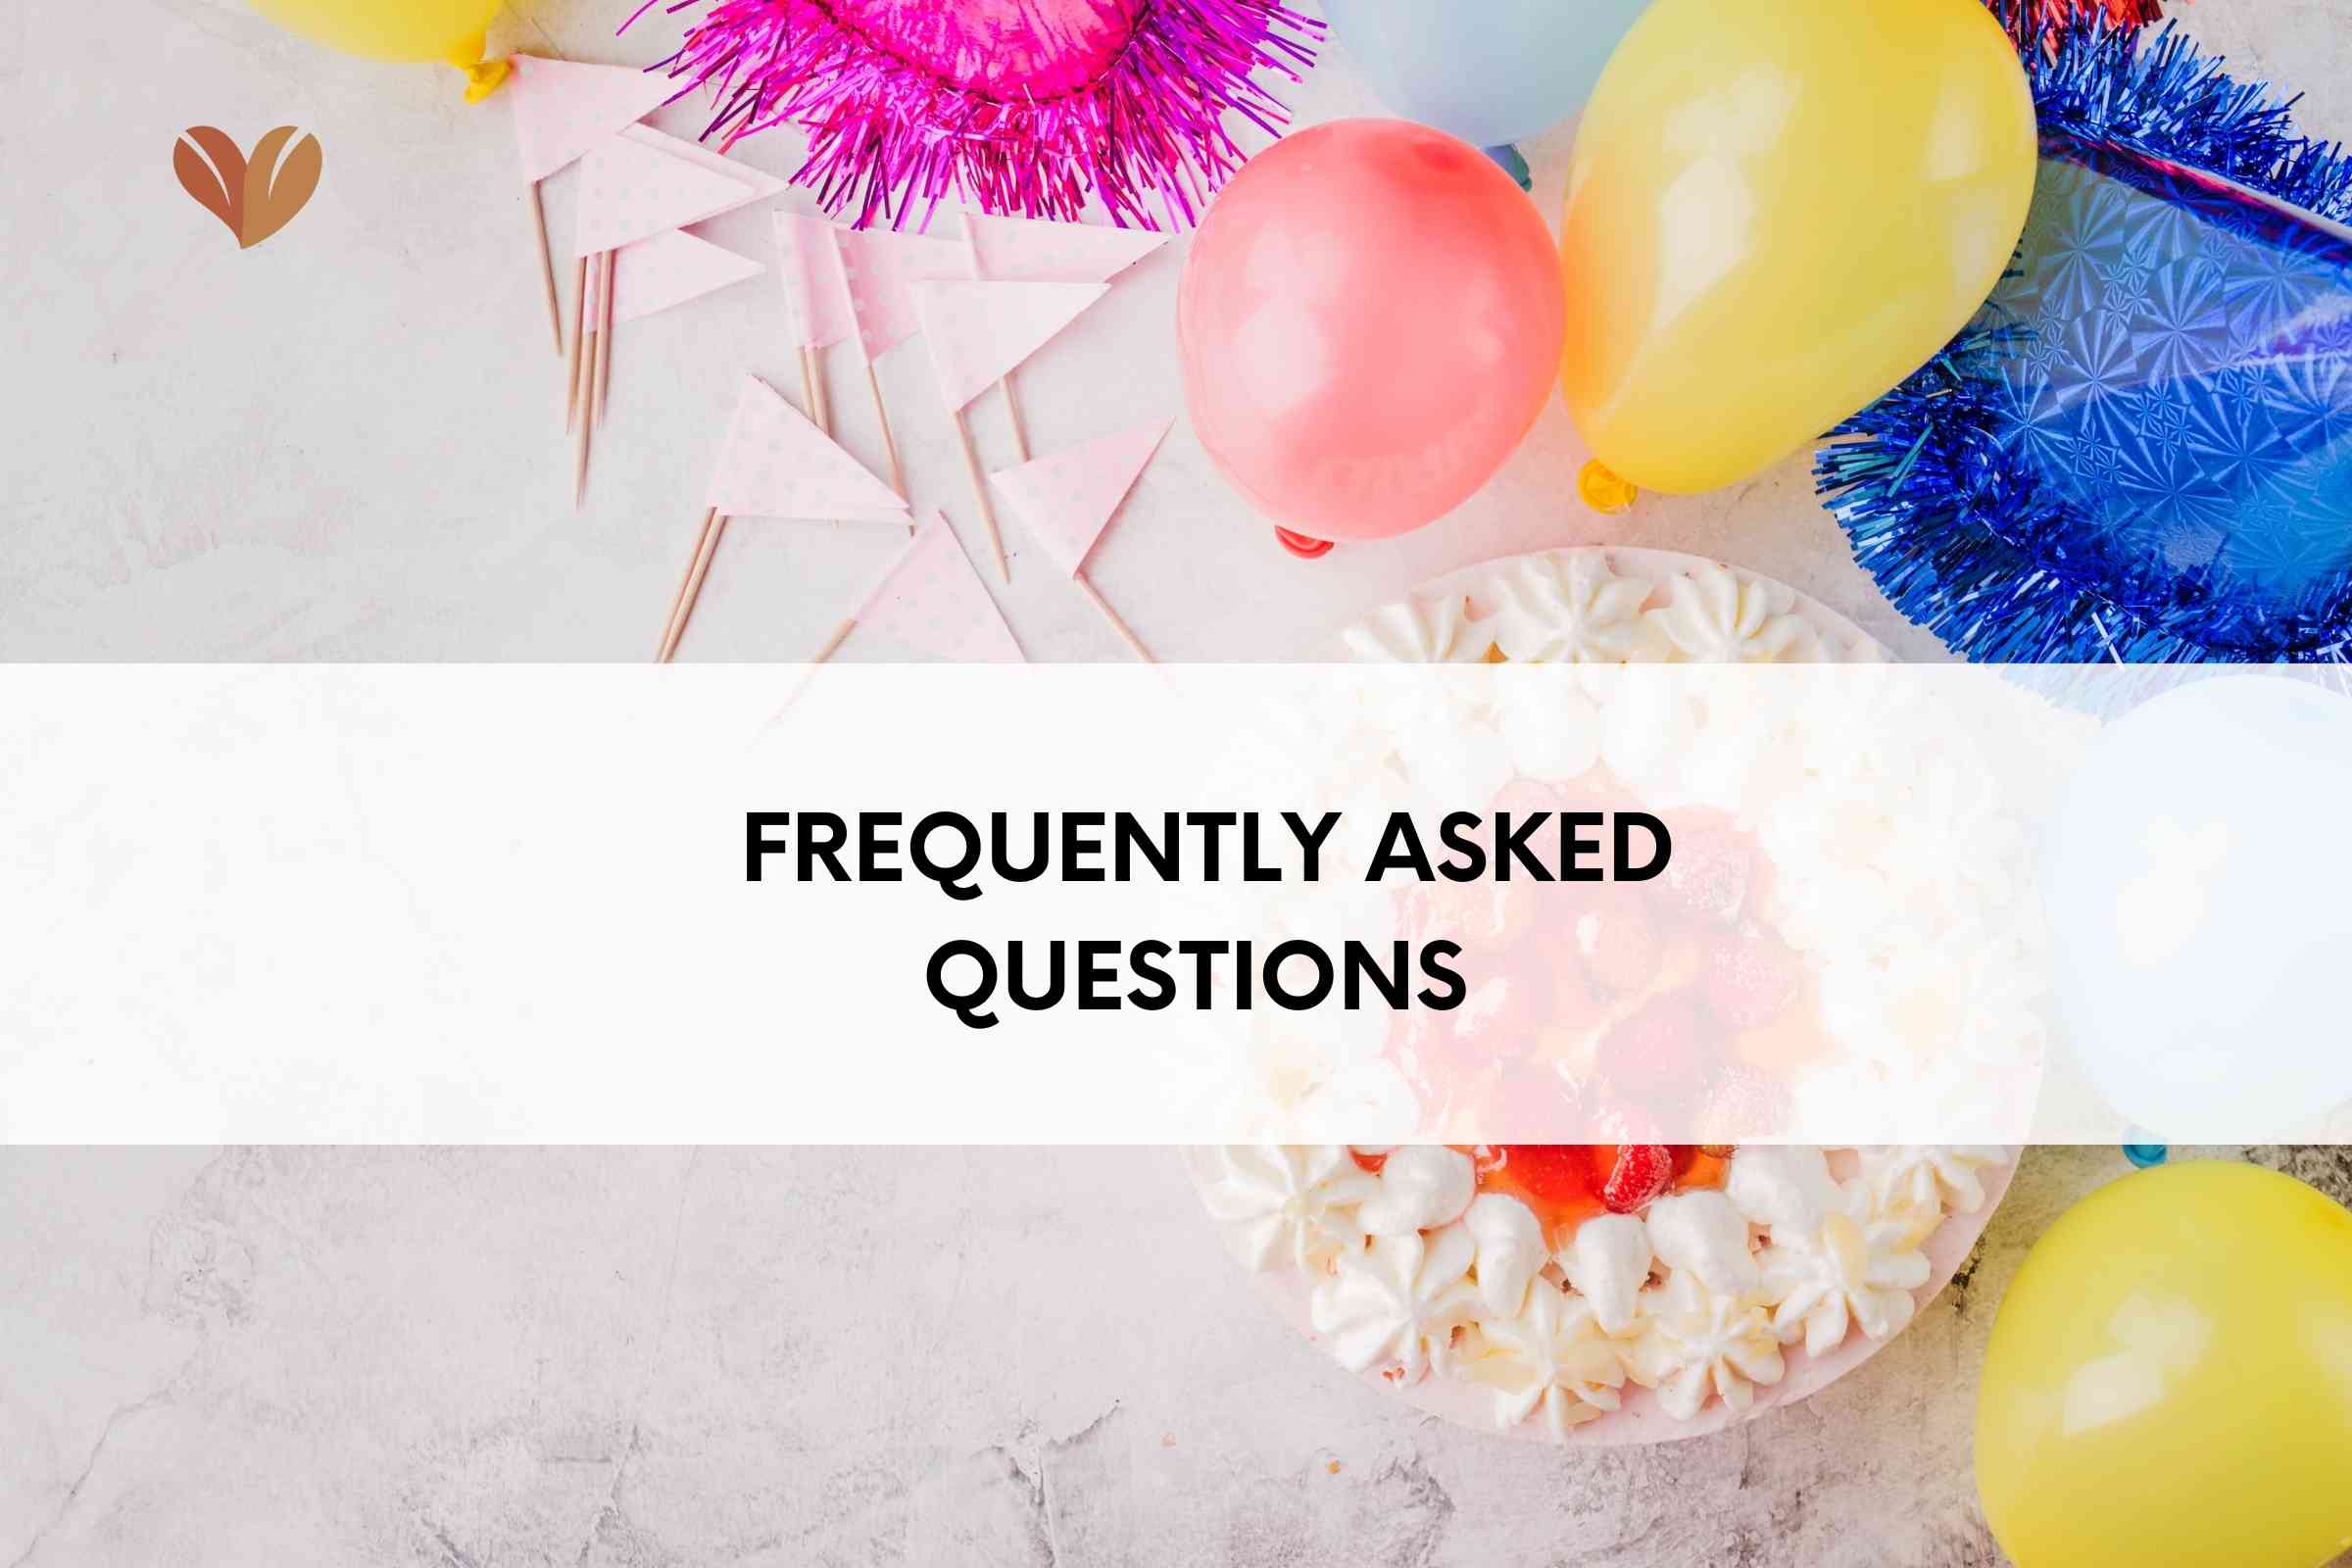 Frequently Asked Questions When Send the Heartfelt Birthday Wishes